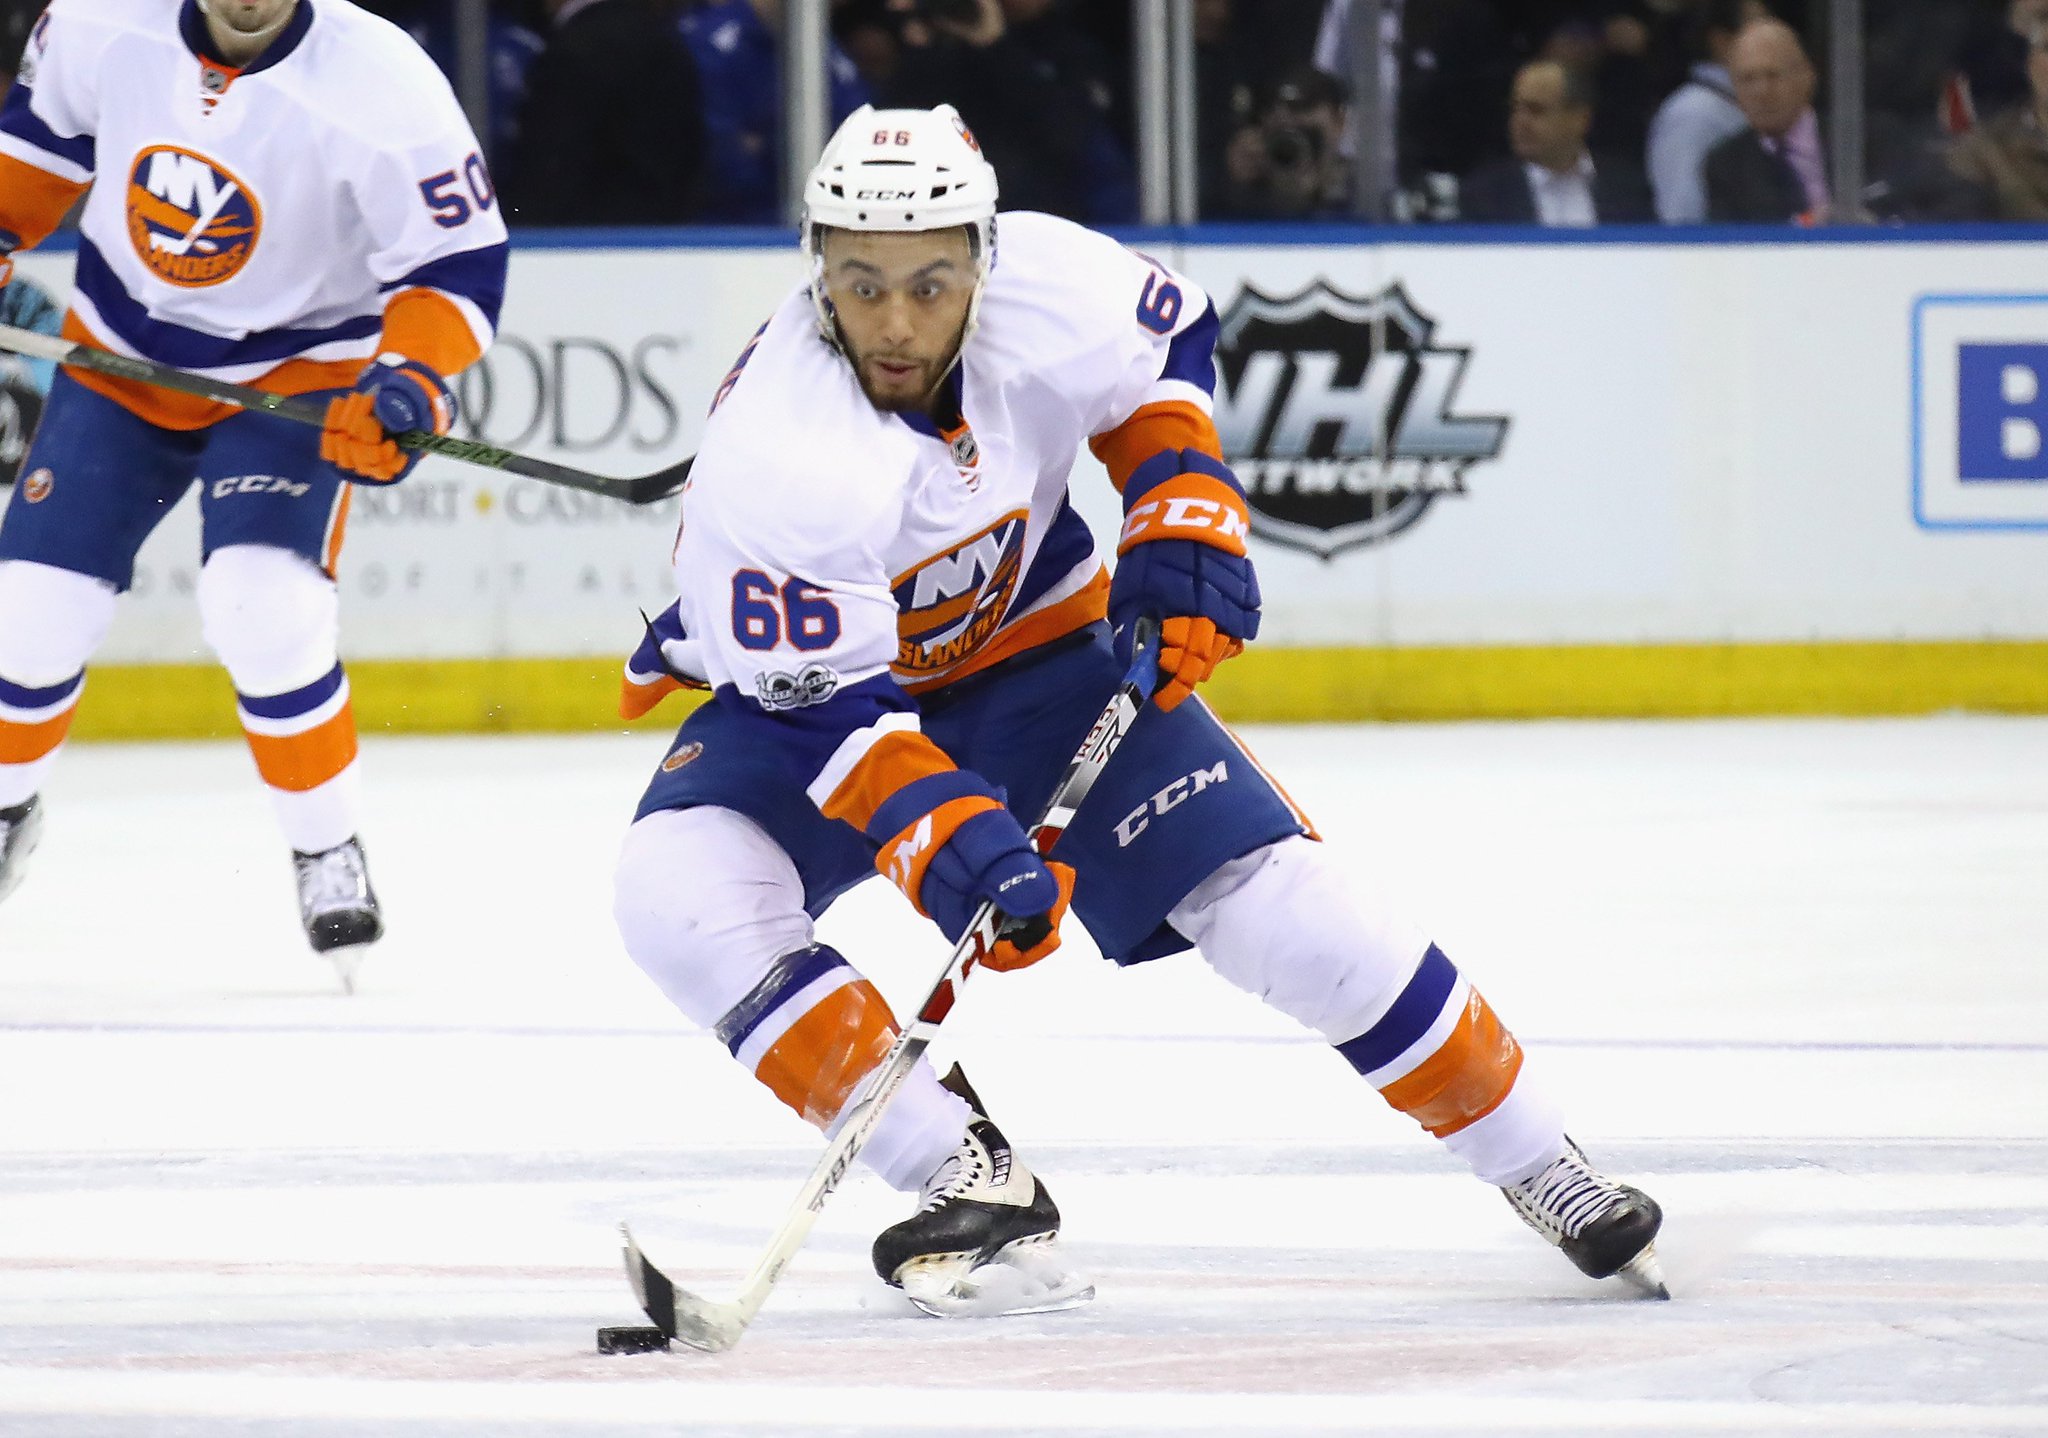 Mario Lemieux is 'fine' with Josh Ho-Sang wearing number 66 - NBC Sports